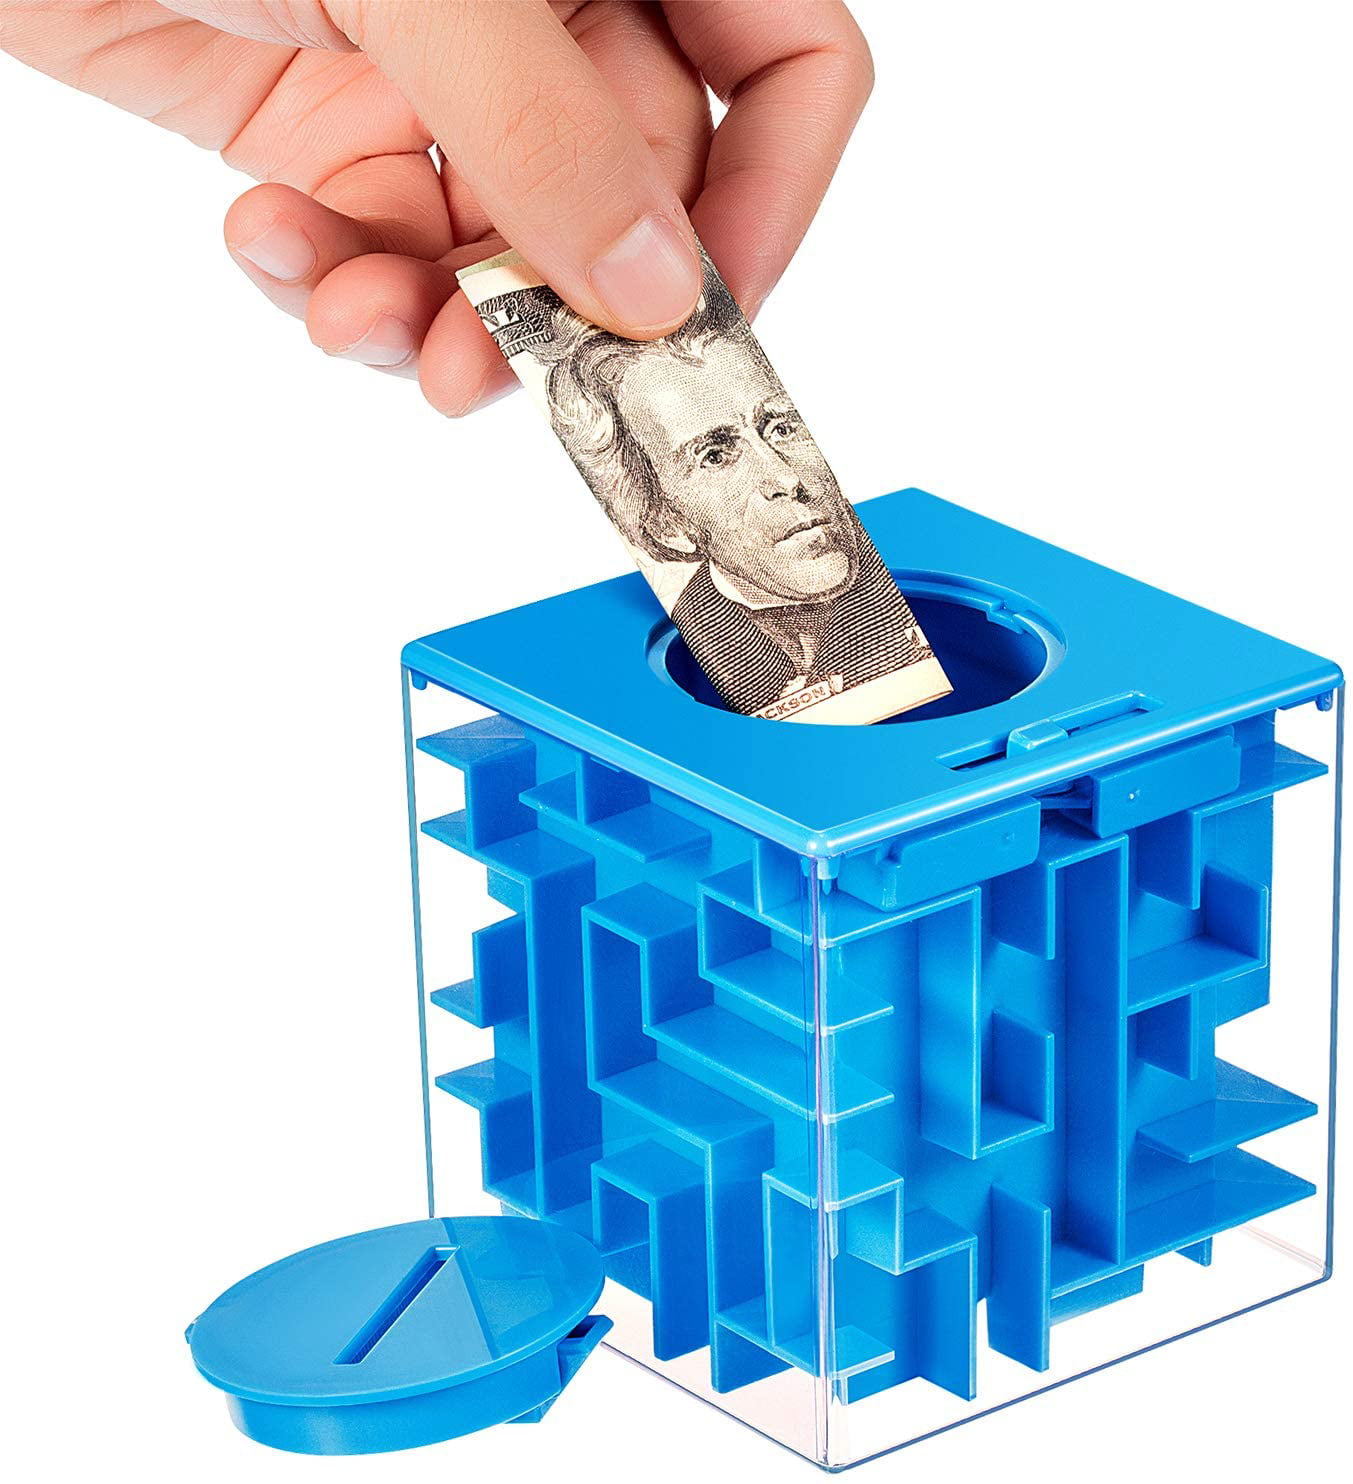 A Fun Unique Way and Brain Teaser... Details about   4 Pieces Money Holder Maze Puzzle Gift Box 